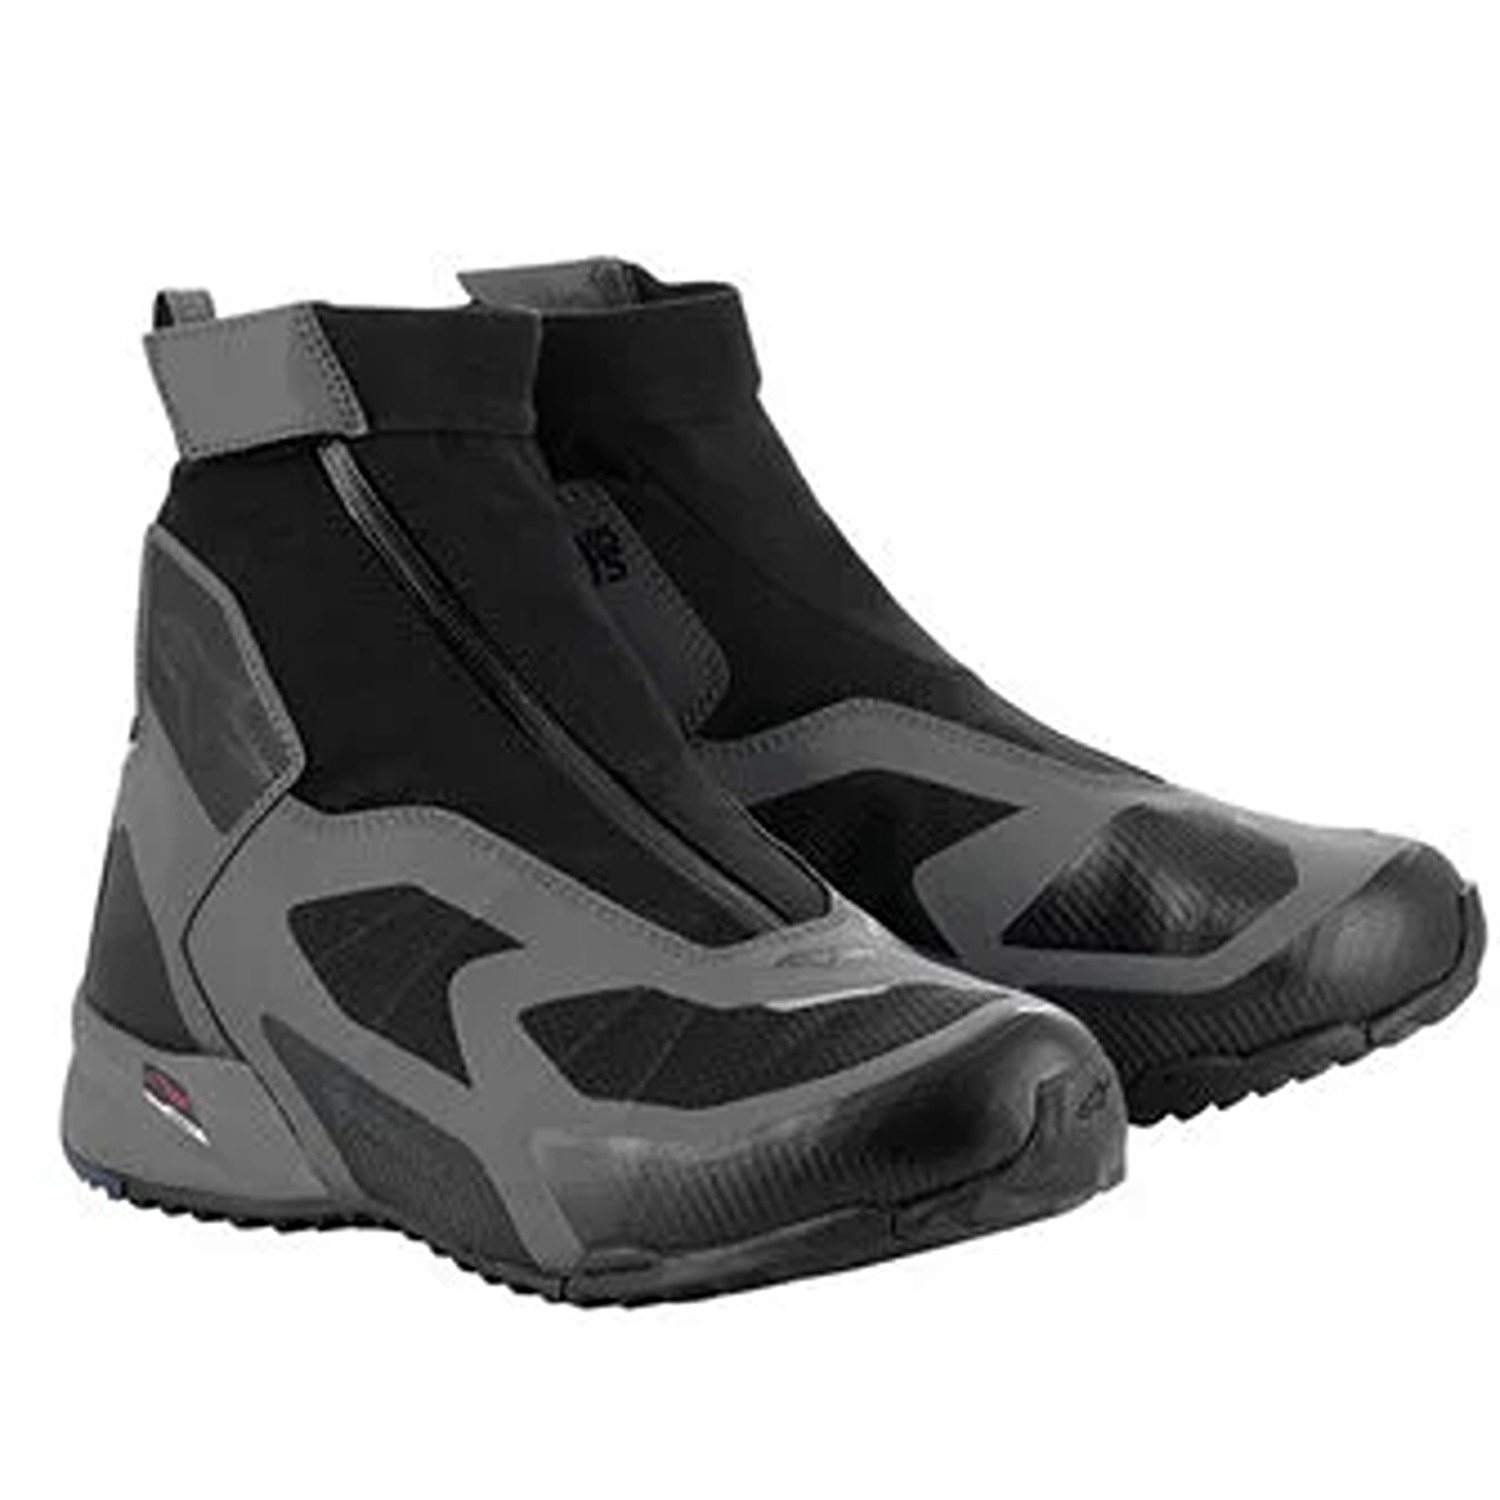 Image of Alpinestars CR-8 Gore-Tex Shoes Black Mid Gray Bright Red Size US 7 ID 8059347260143